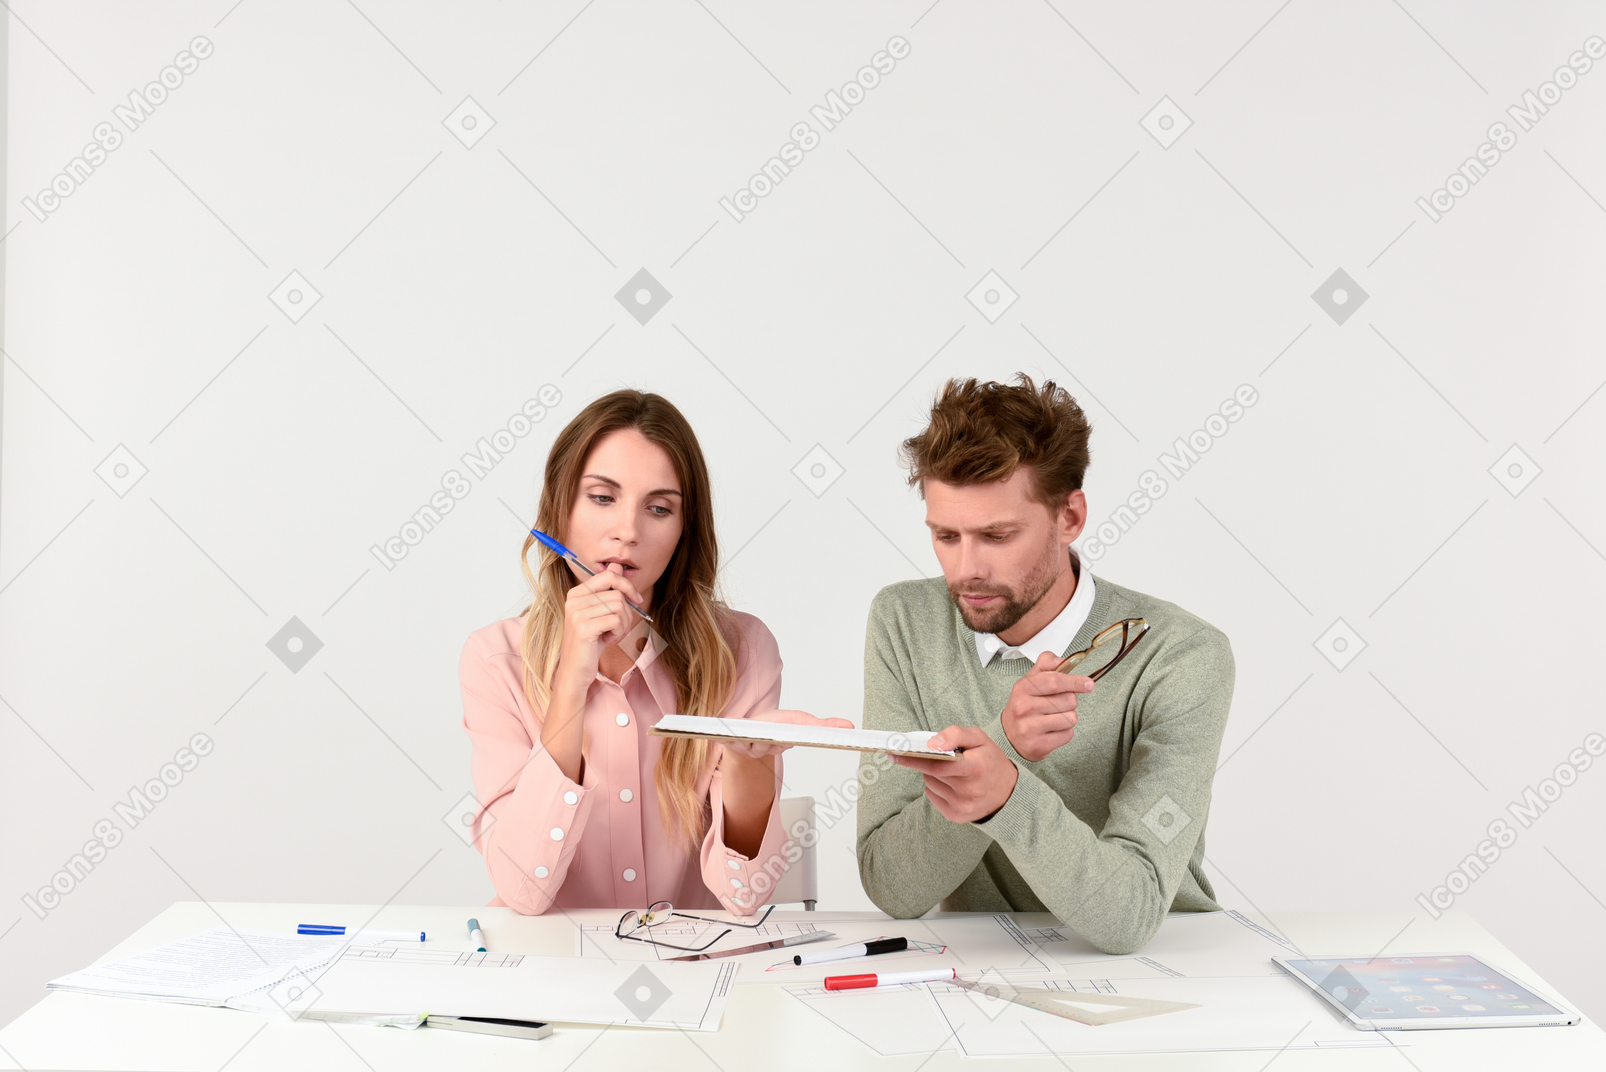 Architects sitting at the tablet and holding tablet